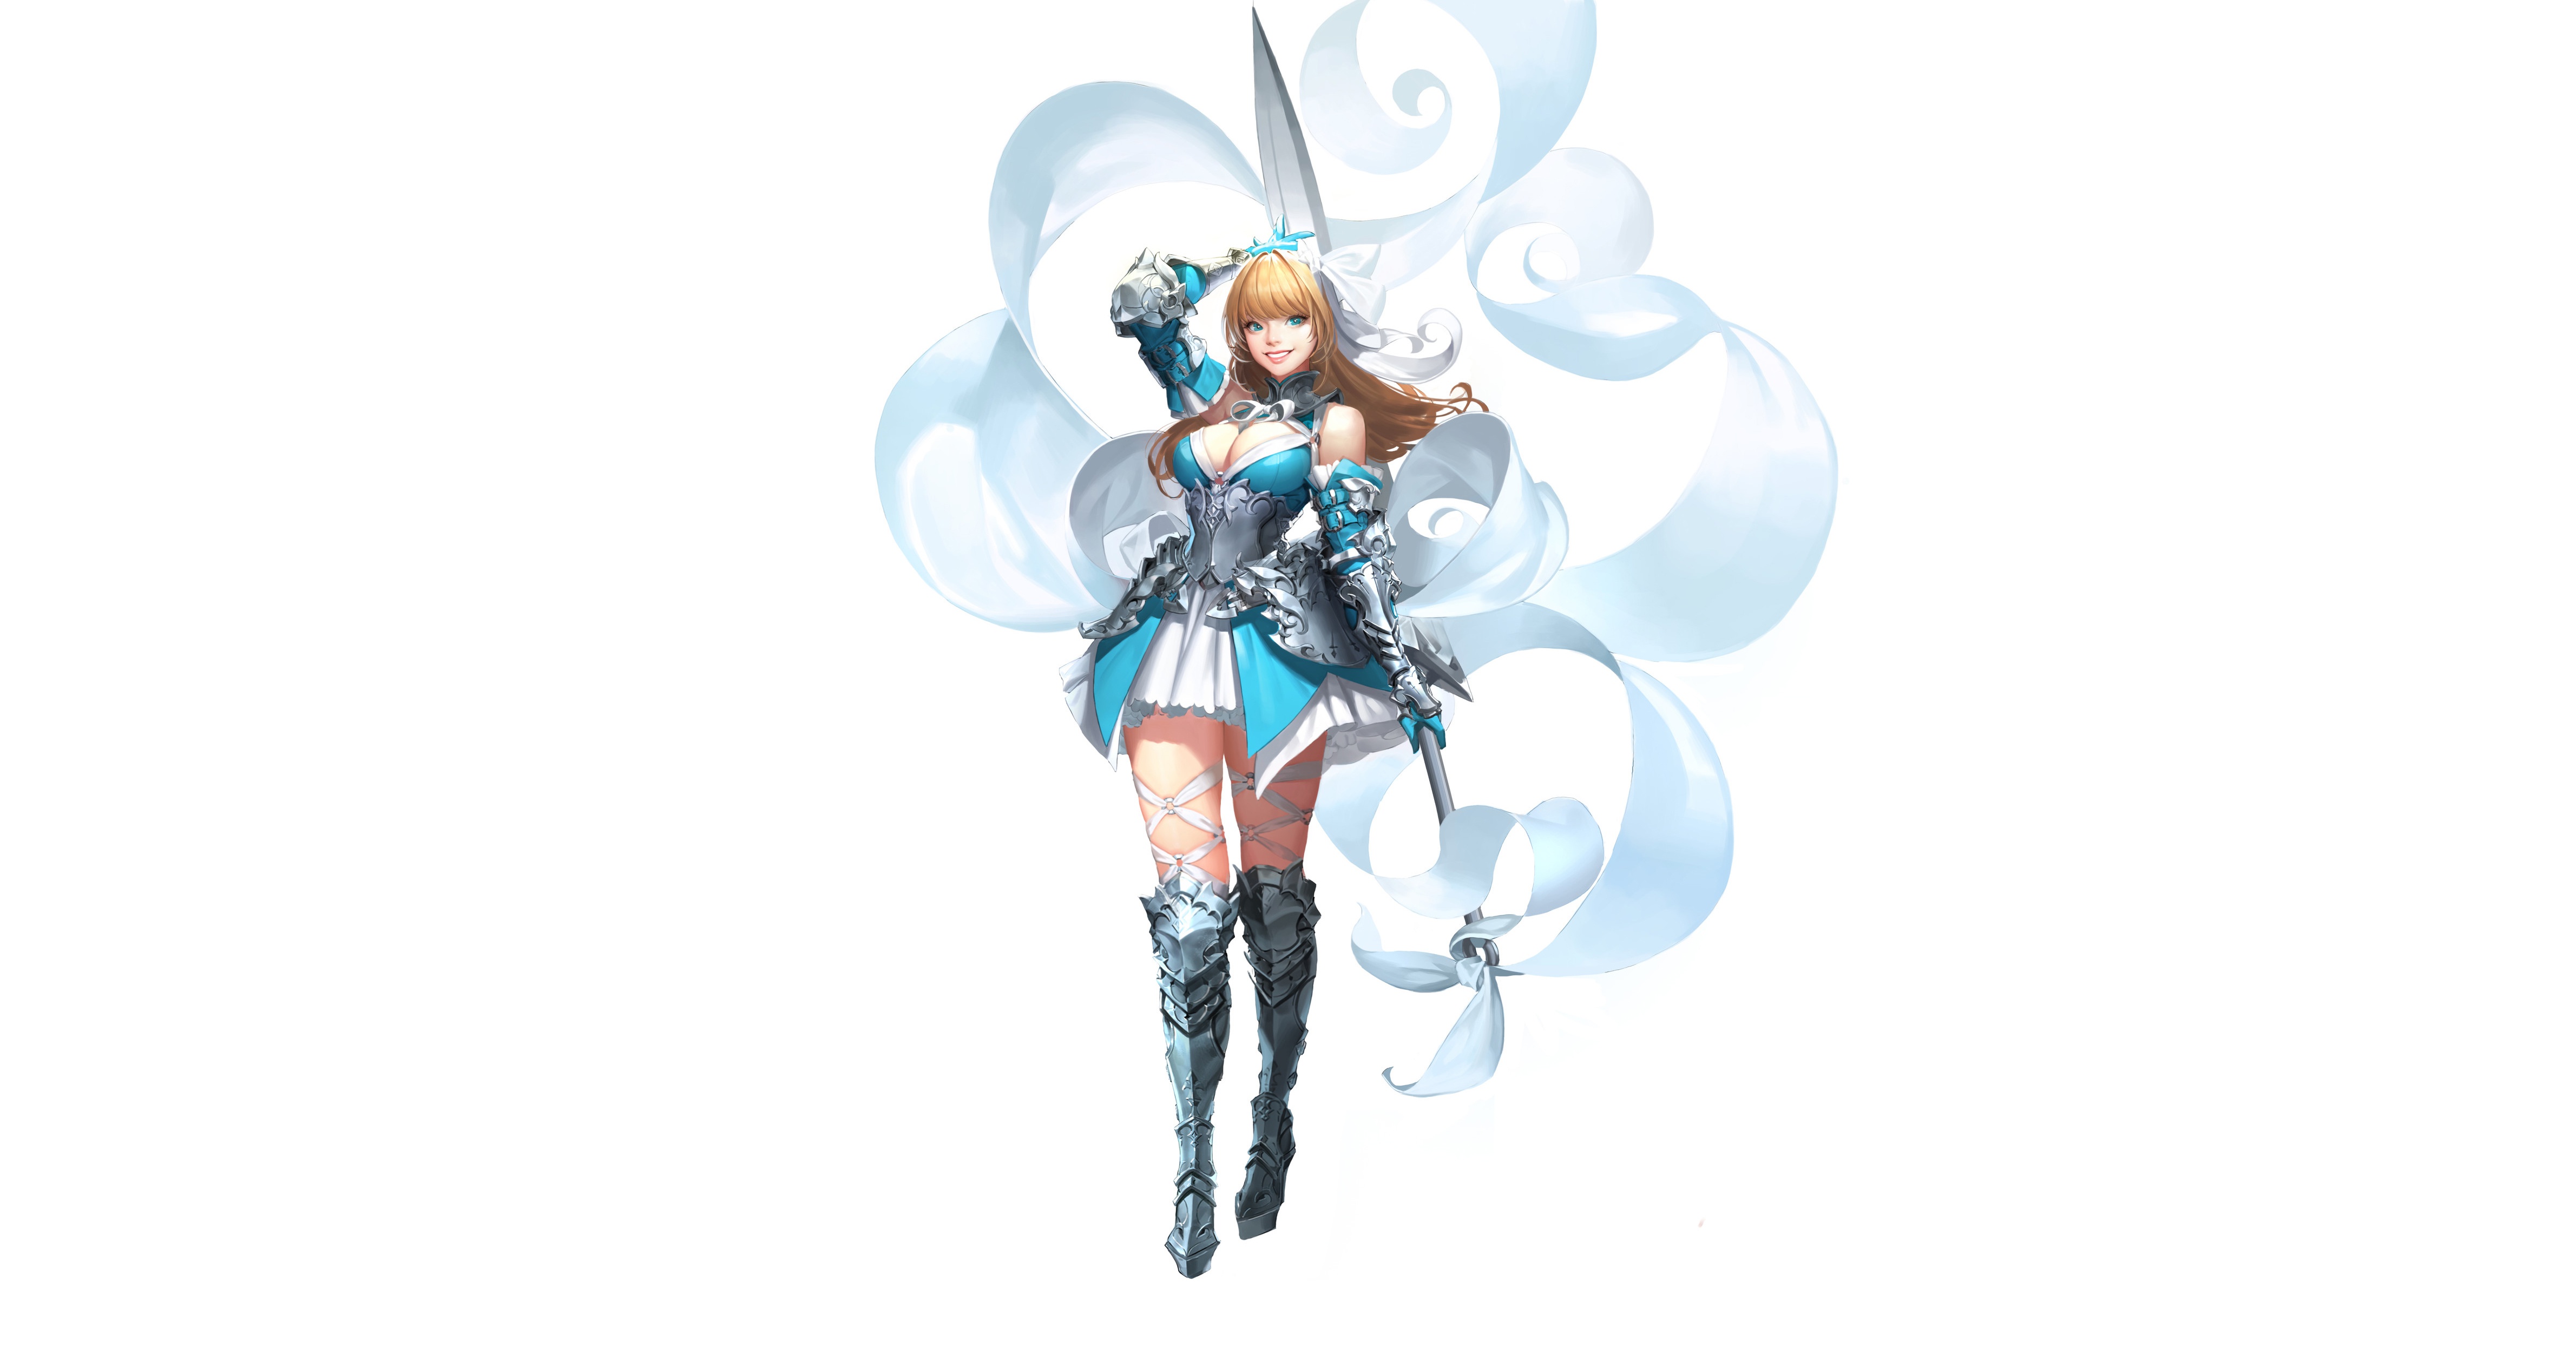 General 4760x2500 fantasy girl fantasy art smiling simple background white background weapon